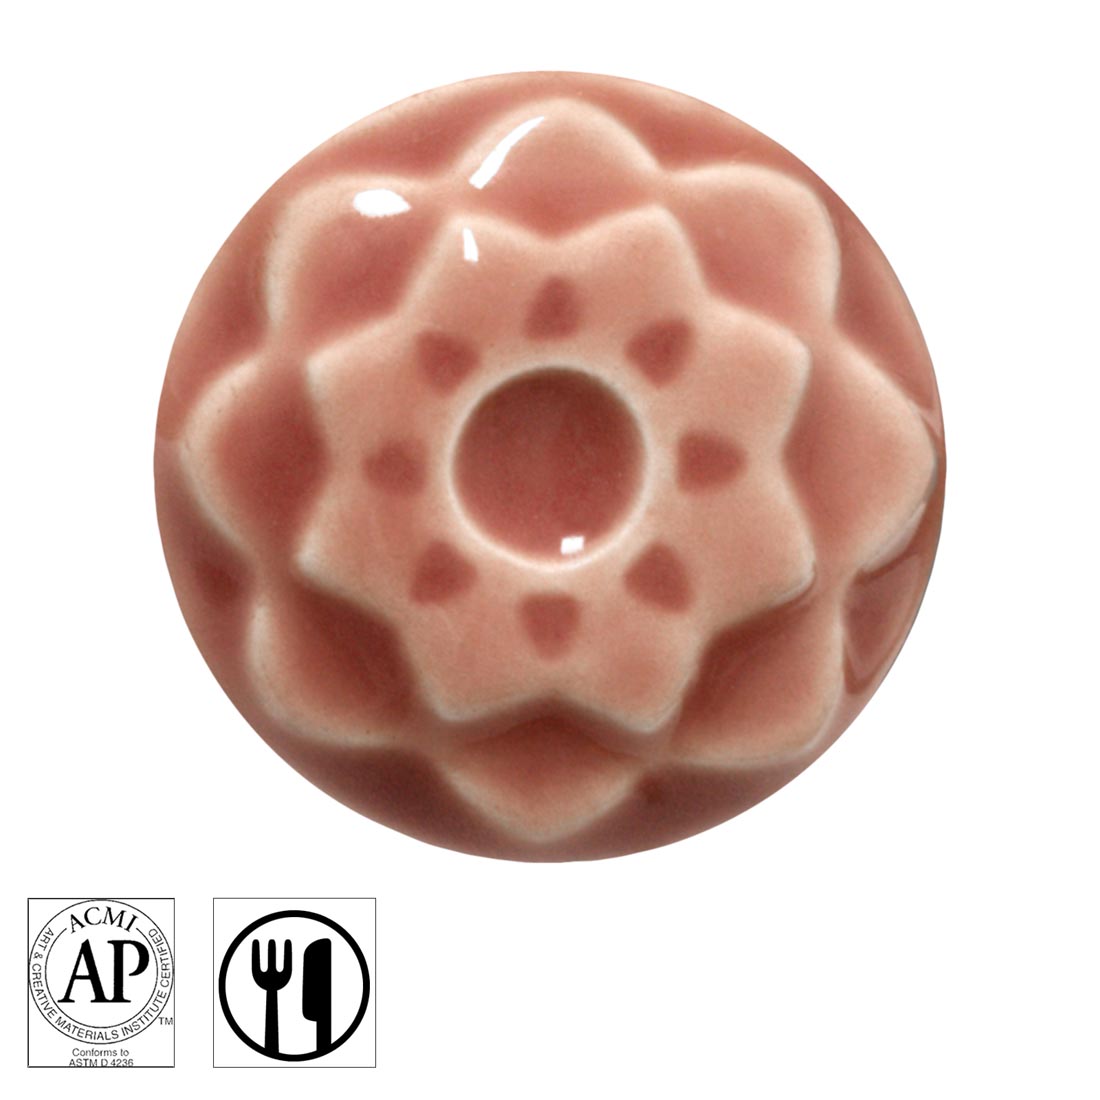 clay chip with Cherry Blossom AMACO Celadon High Fire Transparent Gloss Glaze applied; symbols for AP Seal and food safe